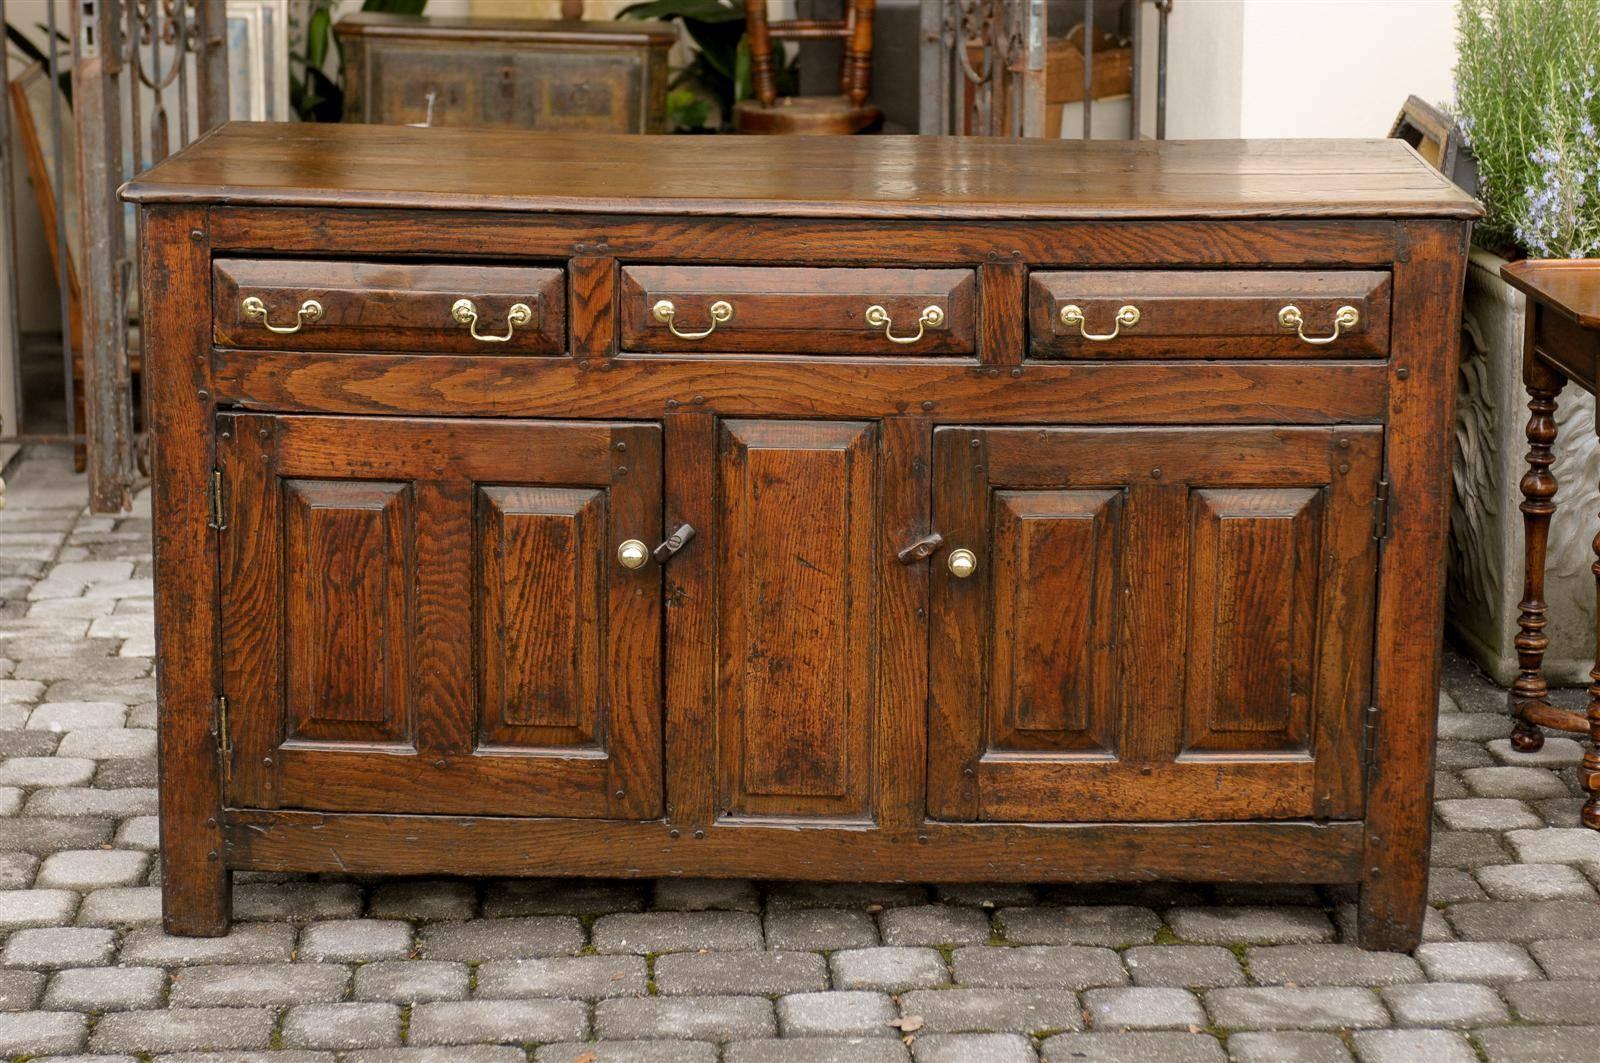 This English oak buffet from the very early part of the 19th century features three drawers over two doors. Each drawer is decorated with two brass bail handles. The two doors are symmetrically placed on each side of a raised panel, repeating this